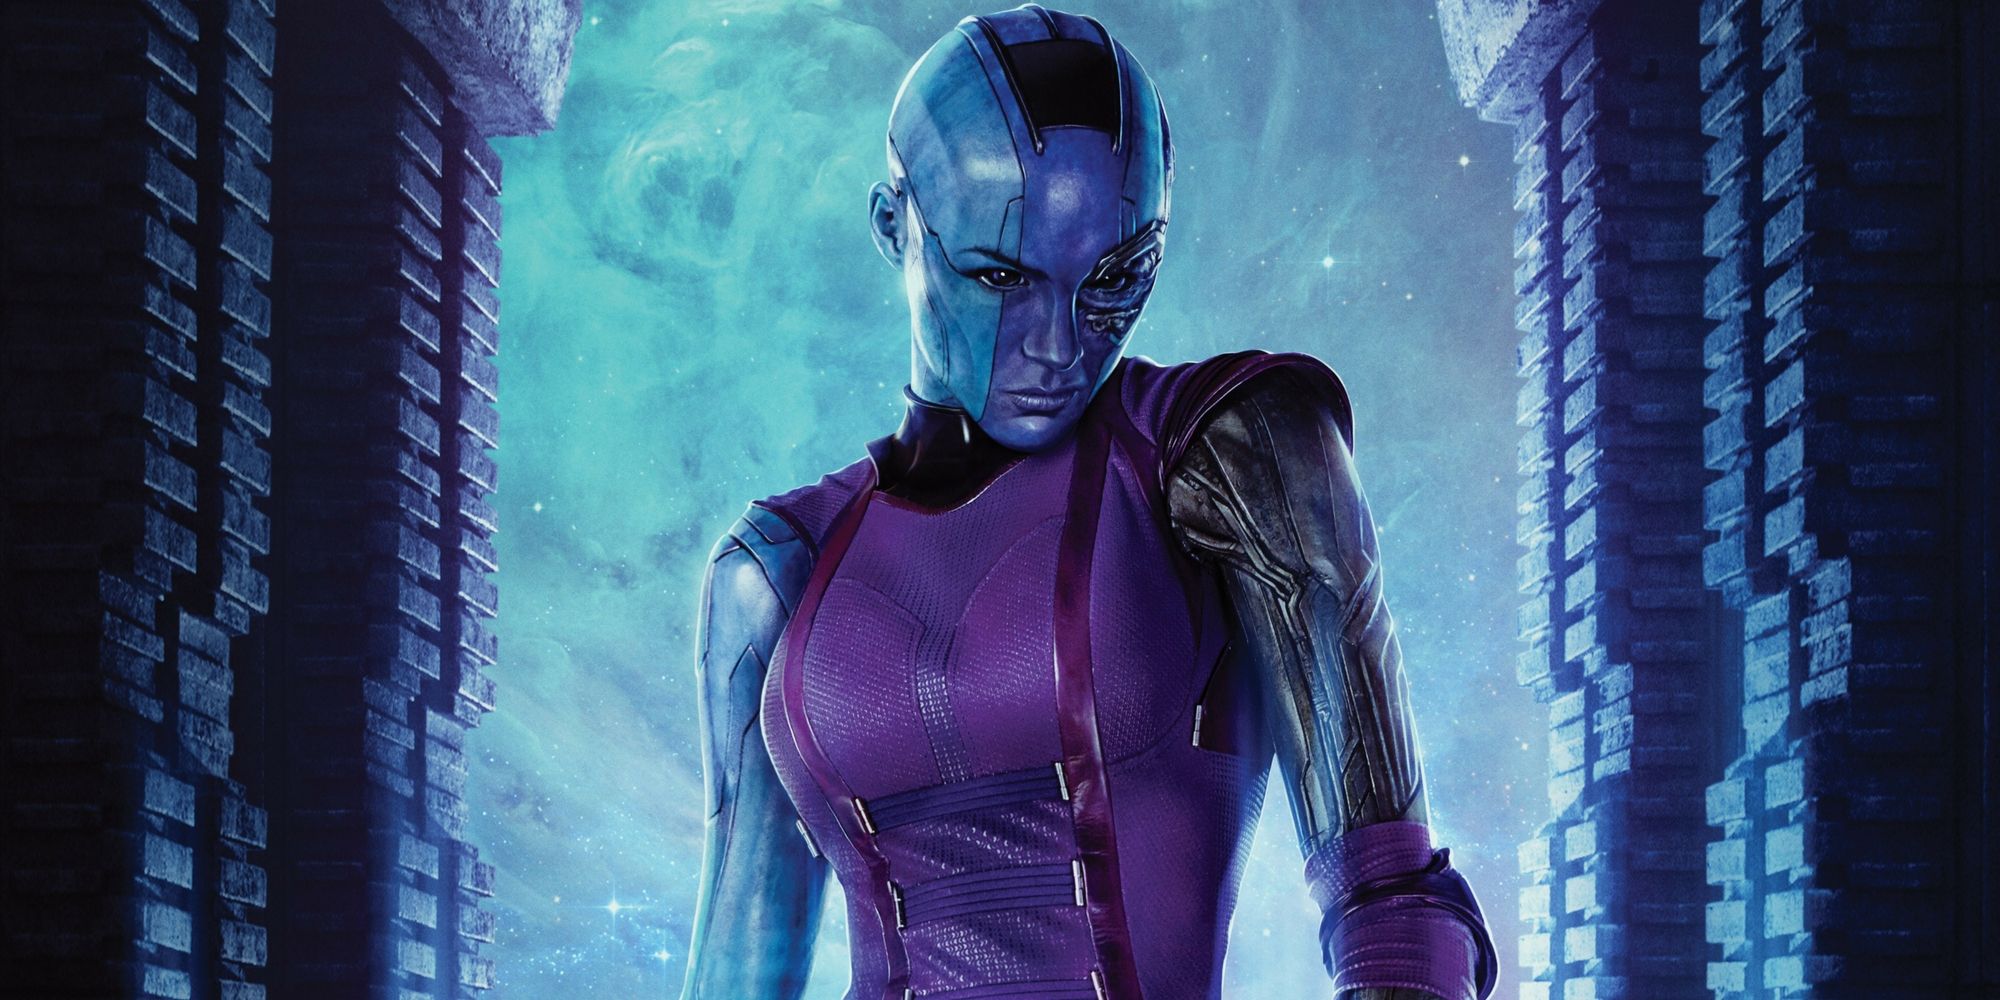 Guardians of the Galaxy 3: Karen Gillan 'Excited' To Make Film For Fans